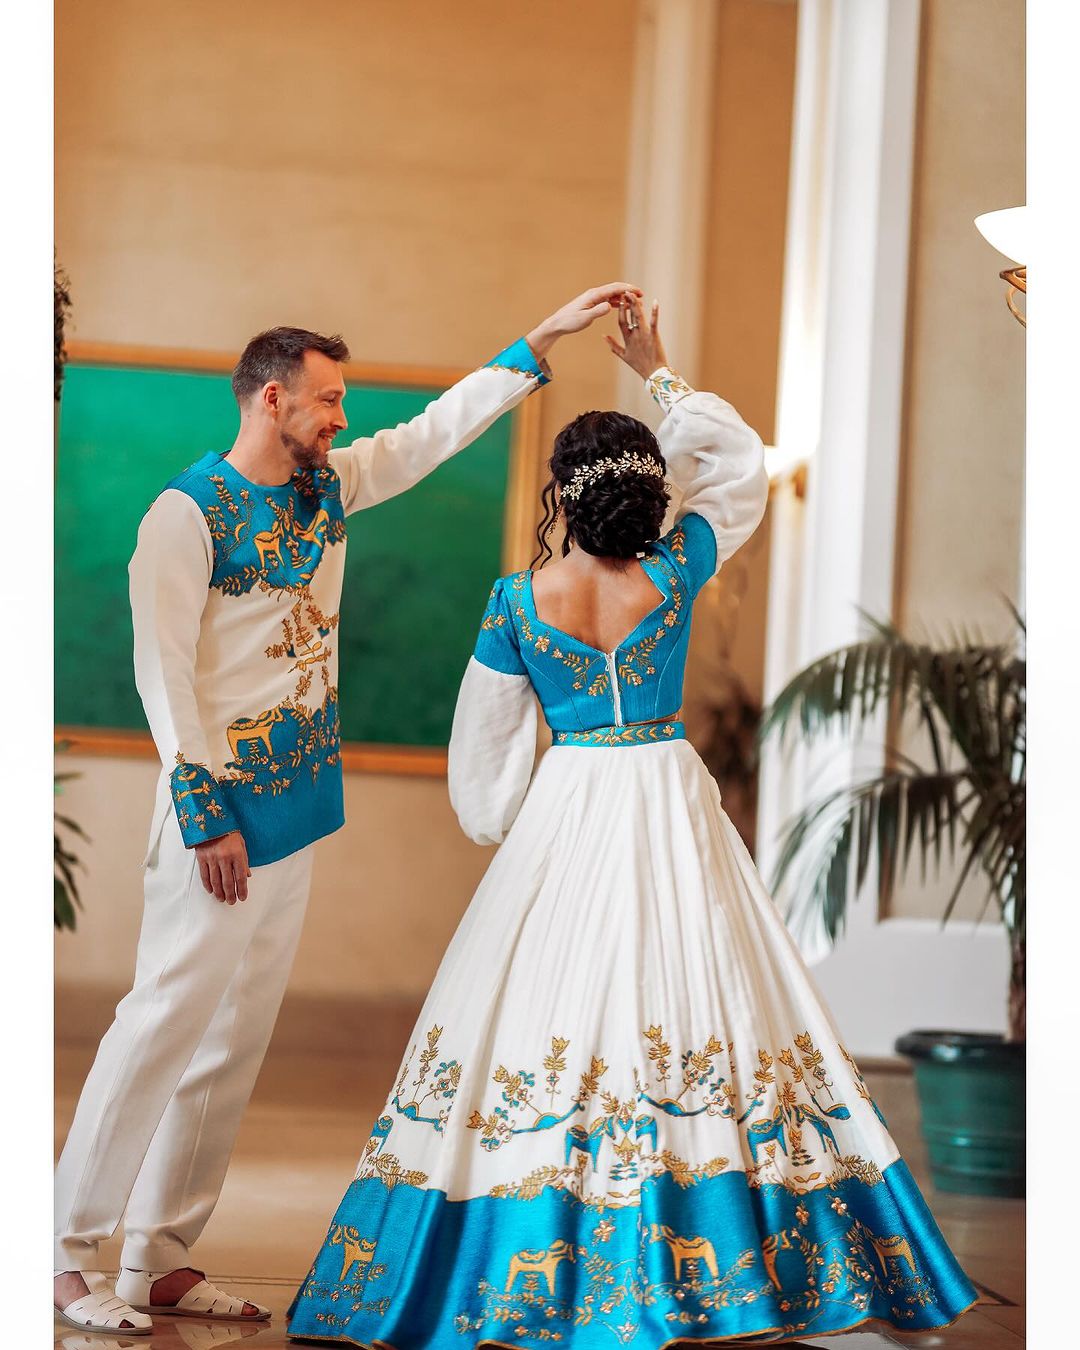 Ethereal Elegance Habesha Couples Outfit Blue Design in Classy Habesha Wedding Attire / including man's pants and shoes